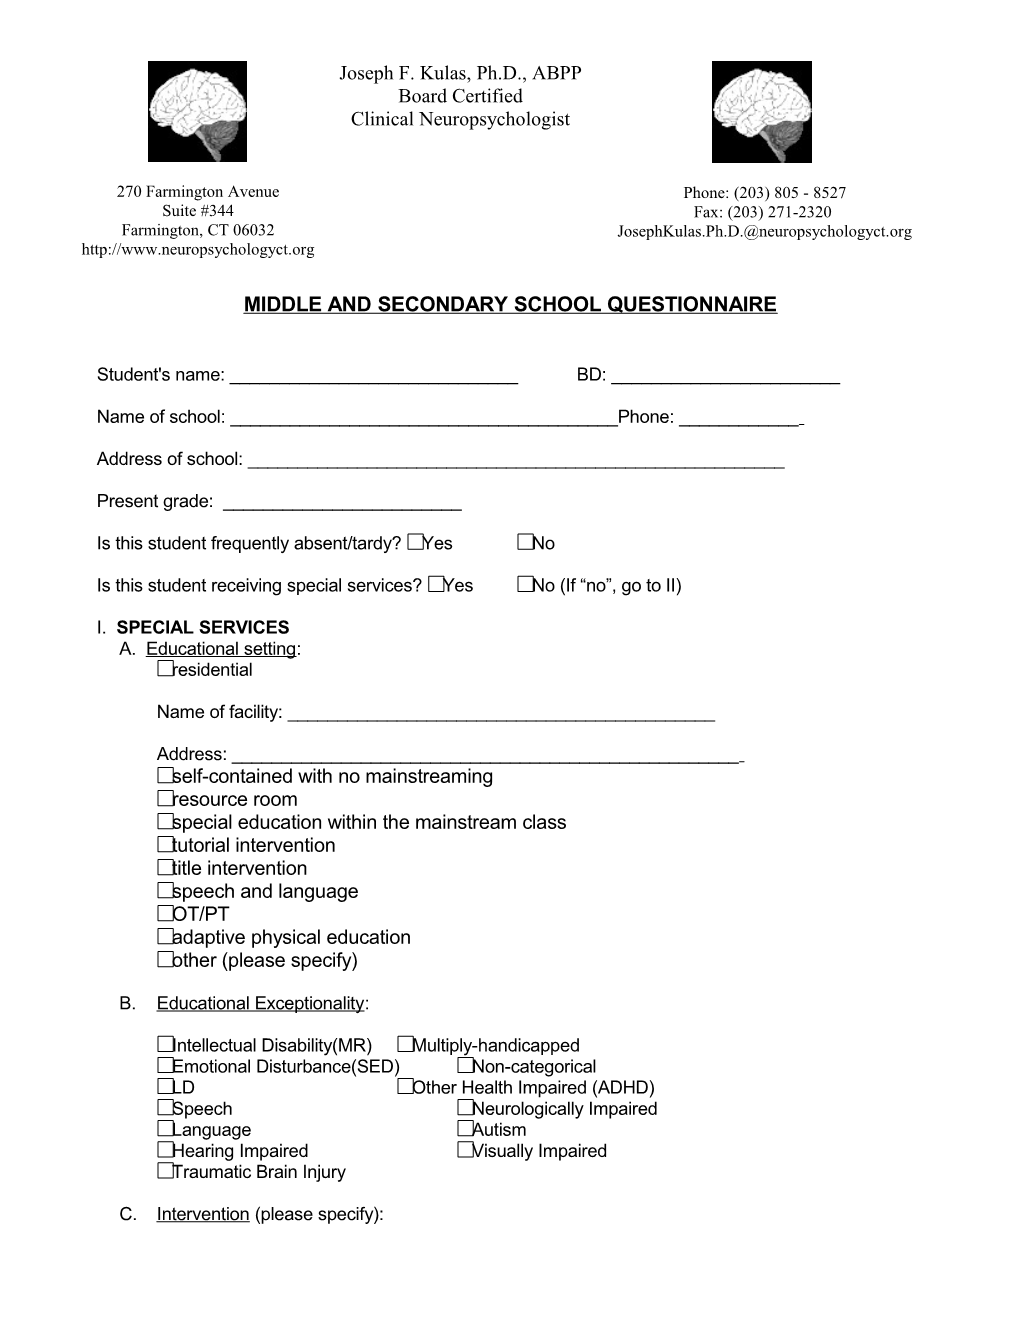 Middle and Secondary School Questionnaire